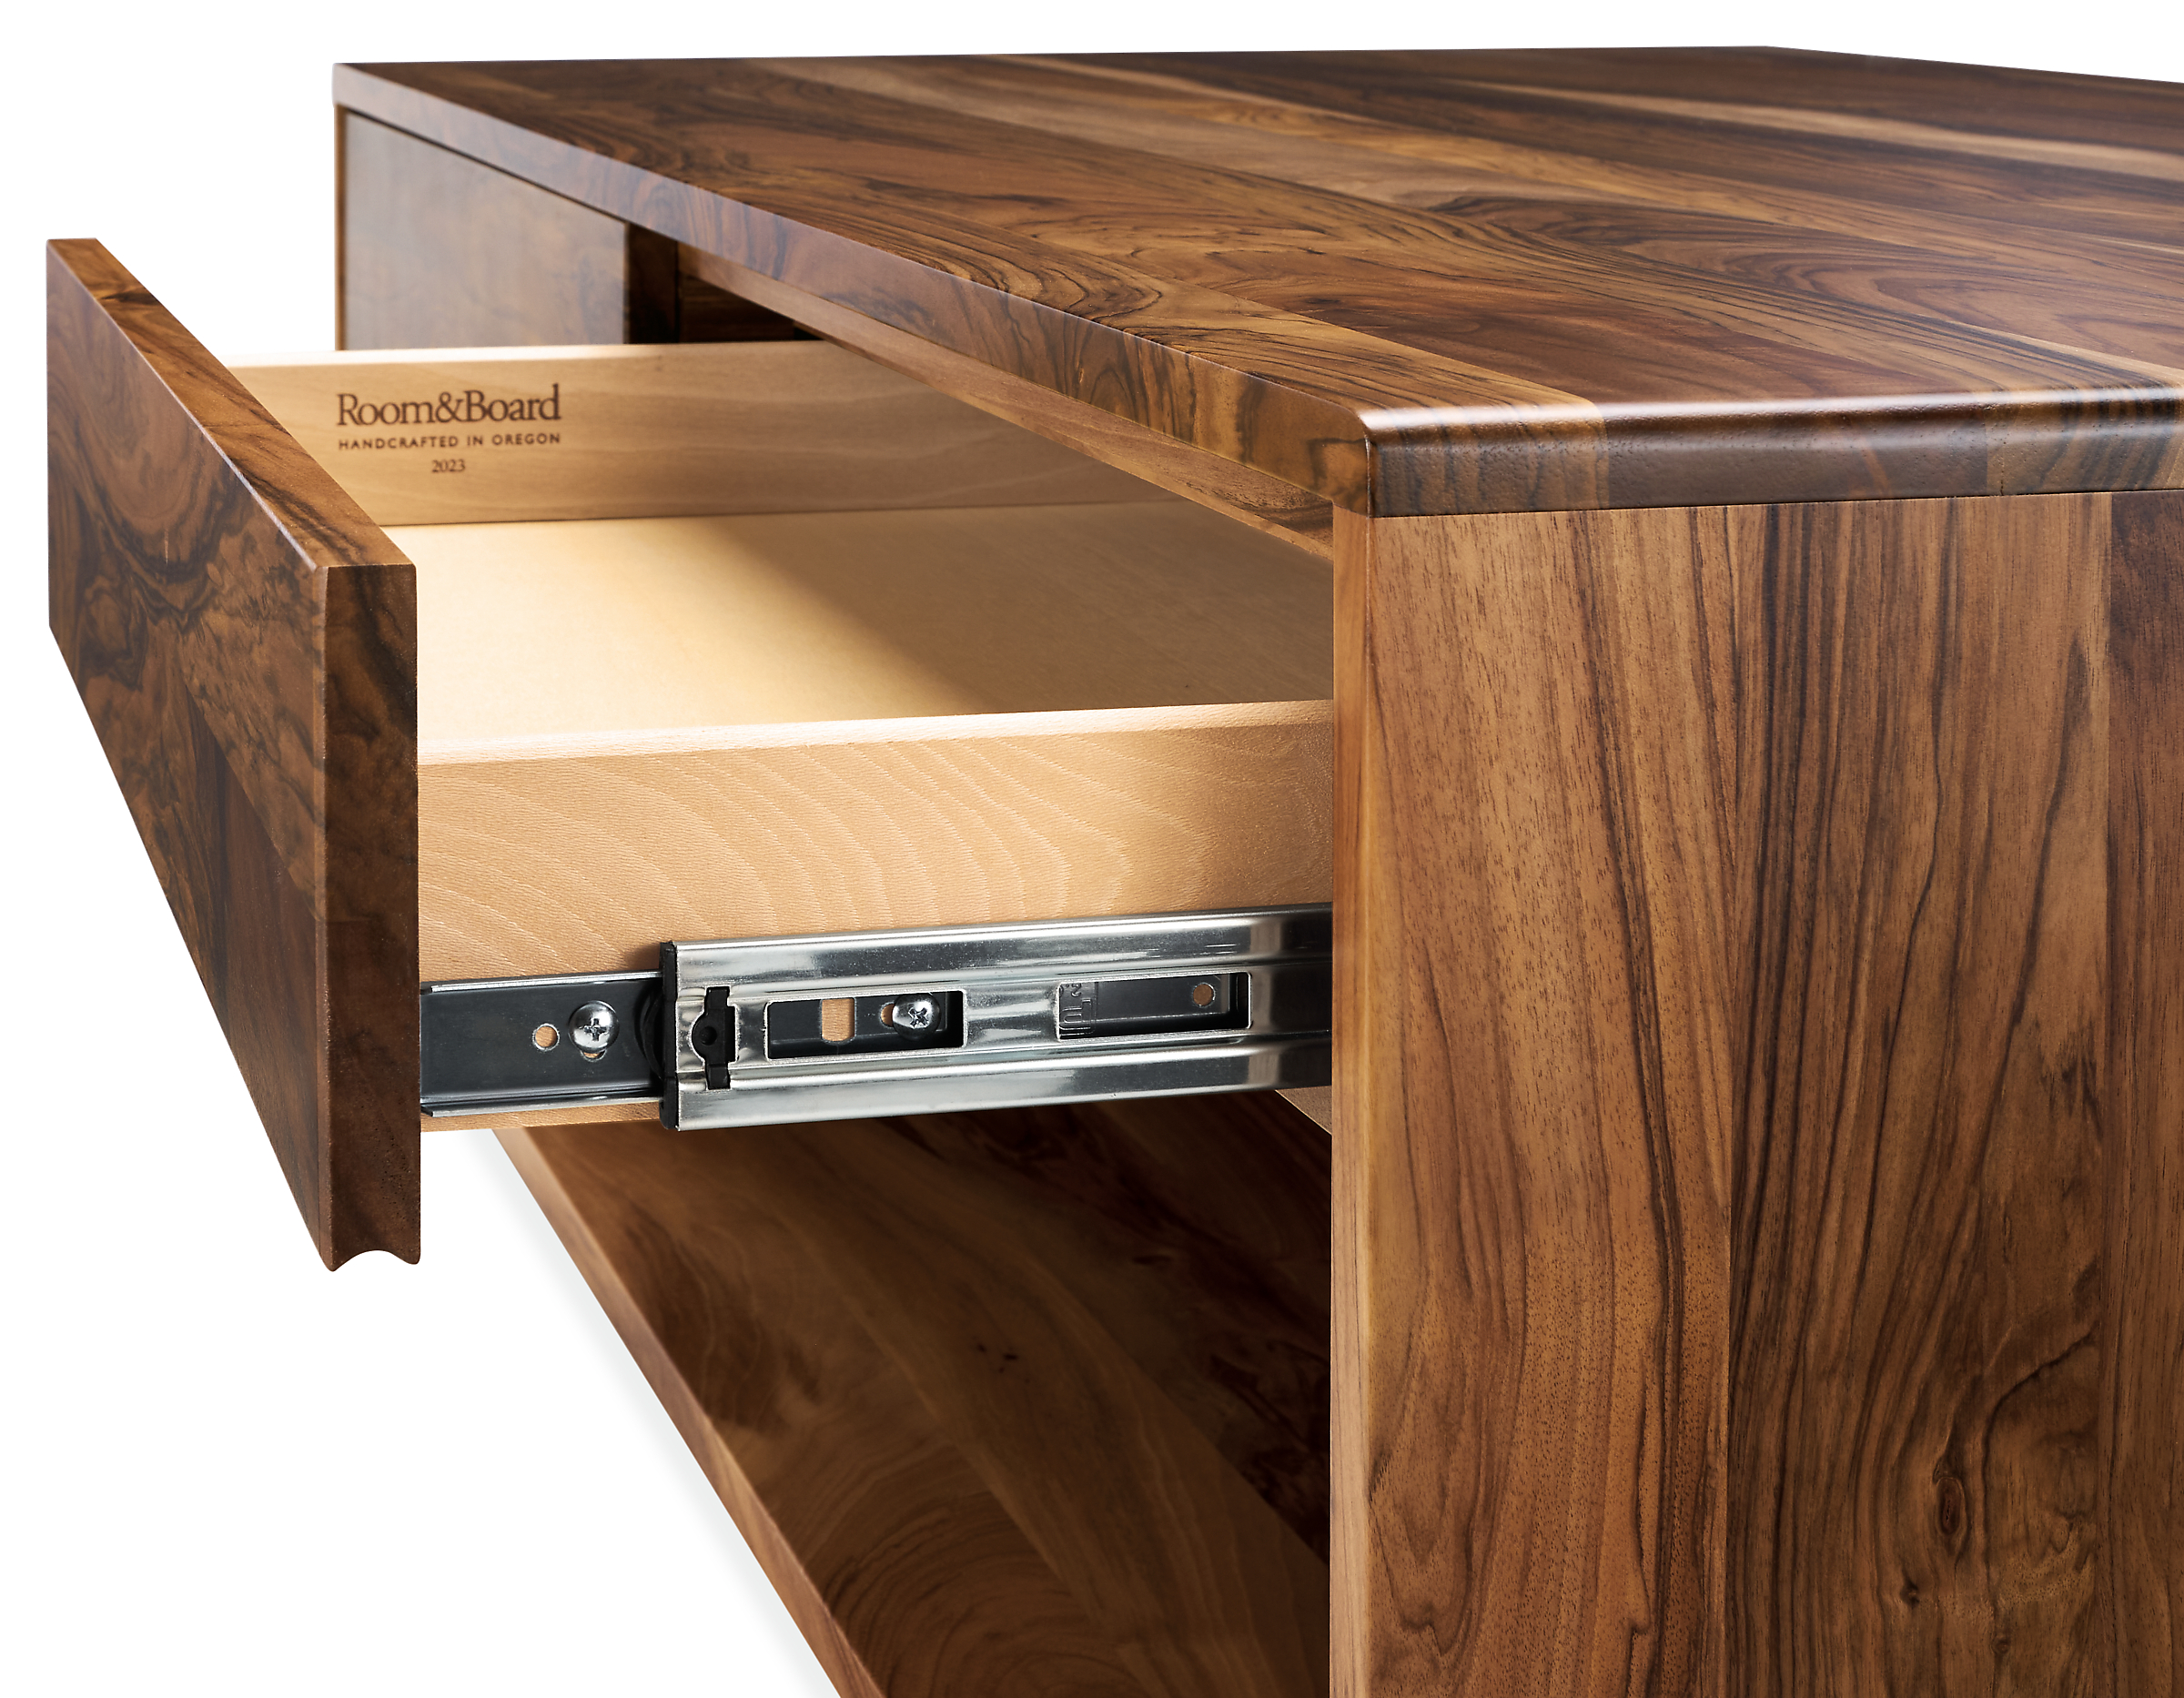 Detail of drawer glides of Graft coffee table.